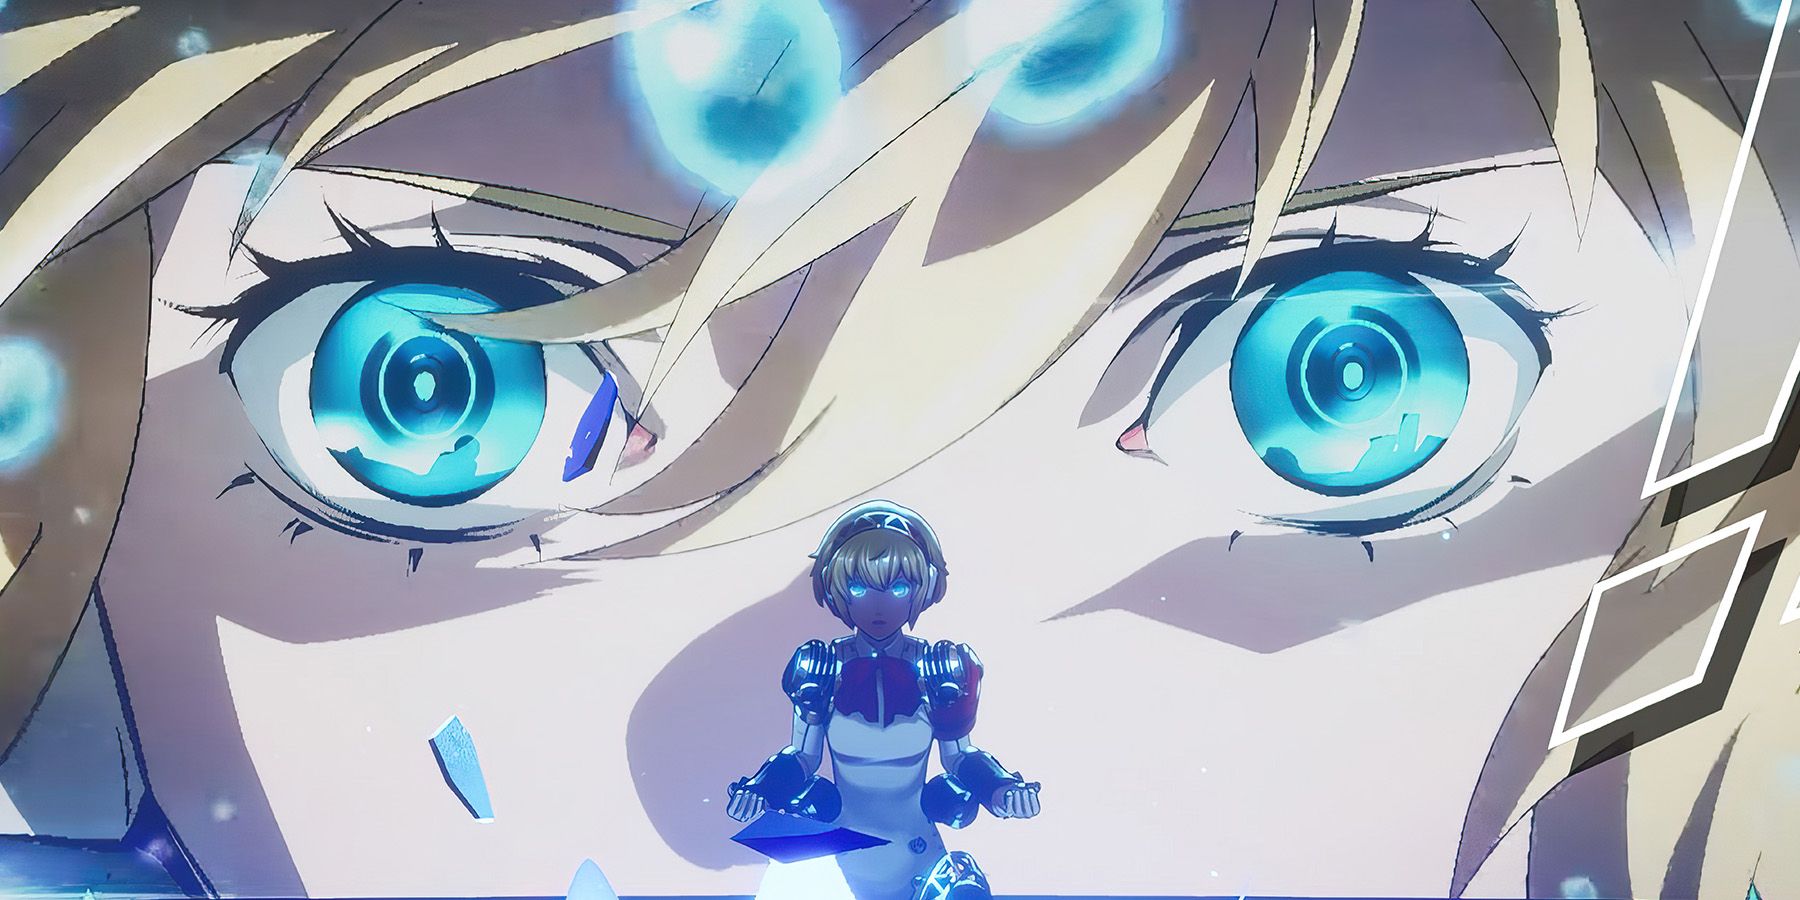 Persona 3 Reload Aigis critical hit Persona summoning freeze frame upscaled 2x1 crop